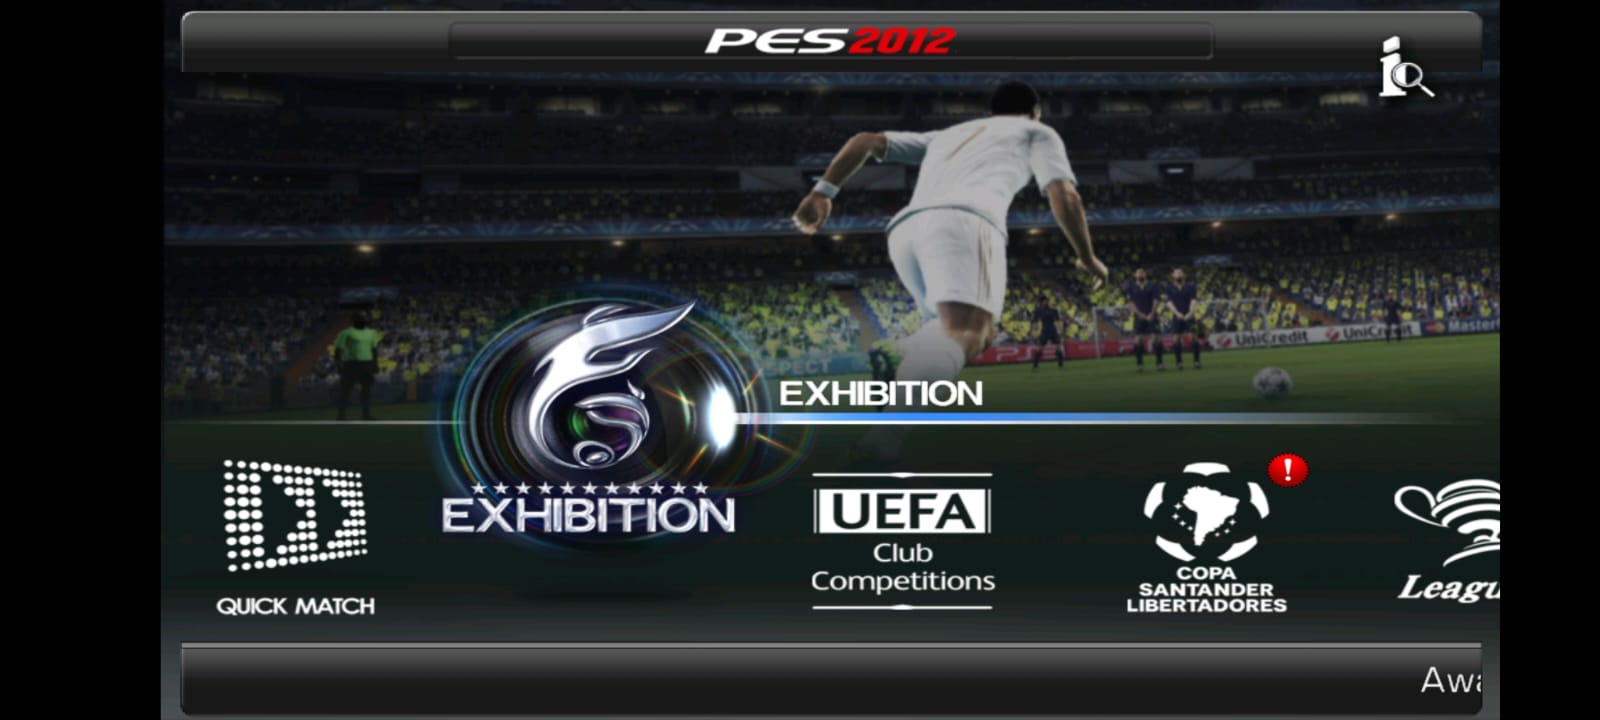 39 Pes 2012 ideas  croatia, android mobile games, evolution soccer